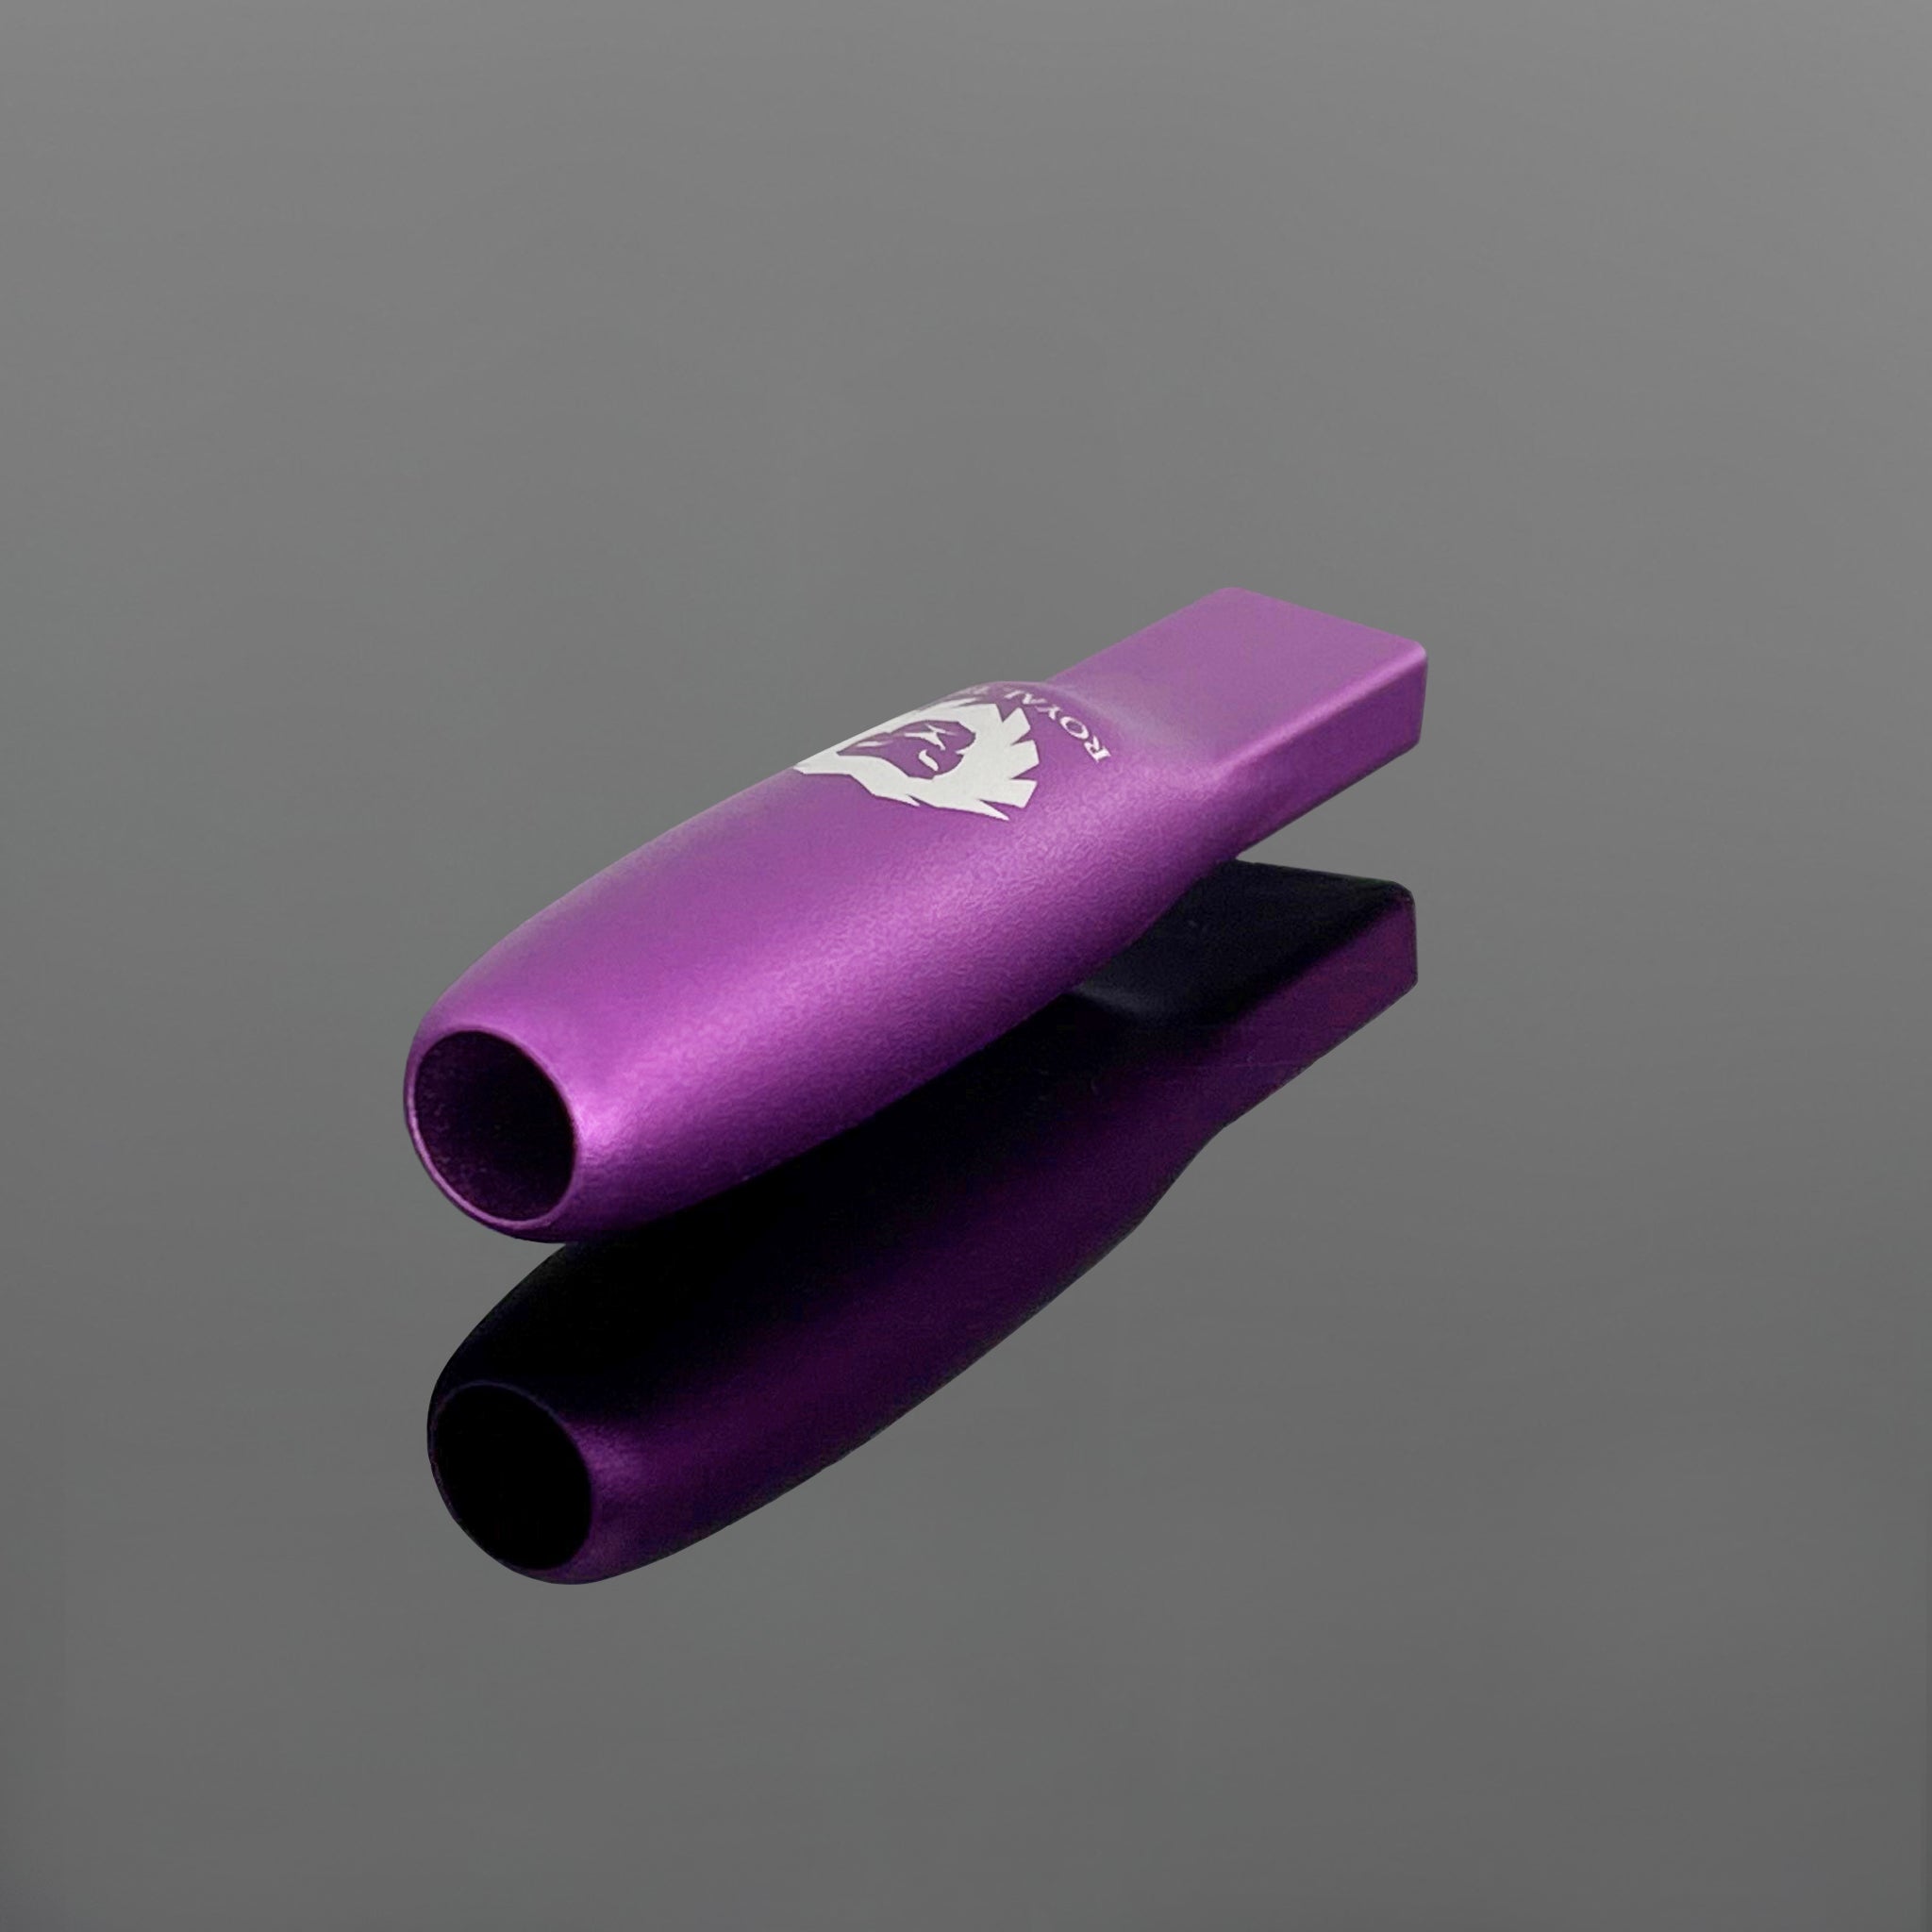 Royal Tip, PURPLE with Box